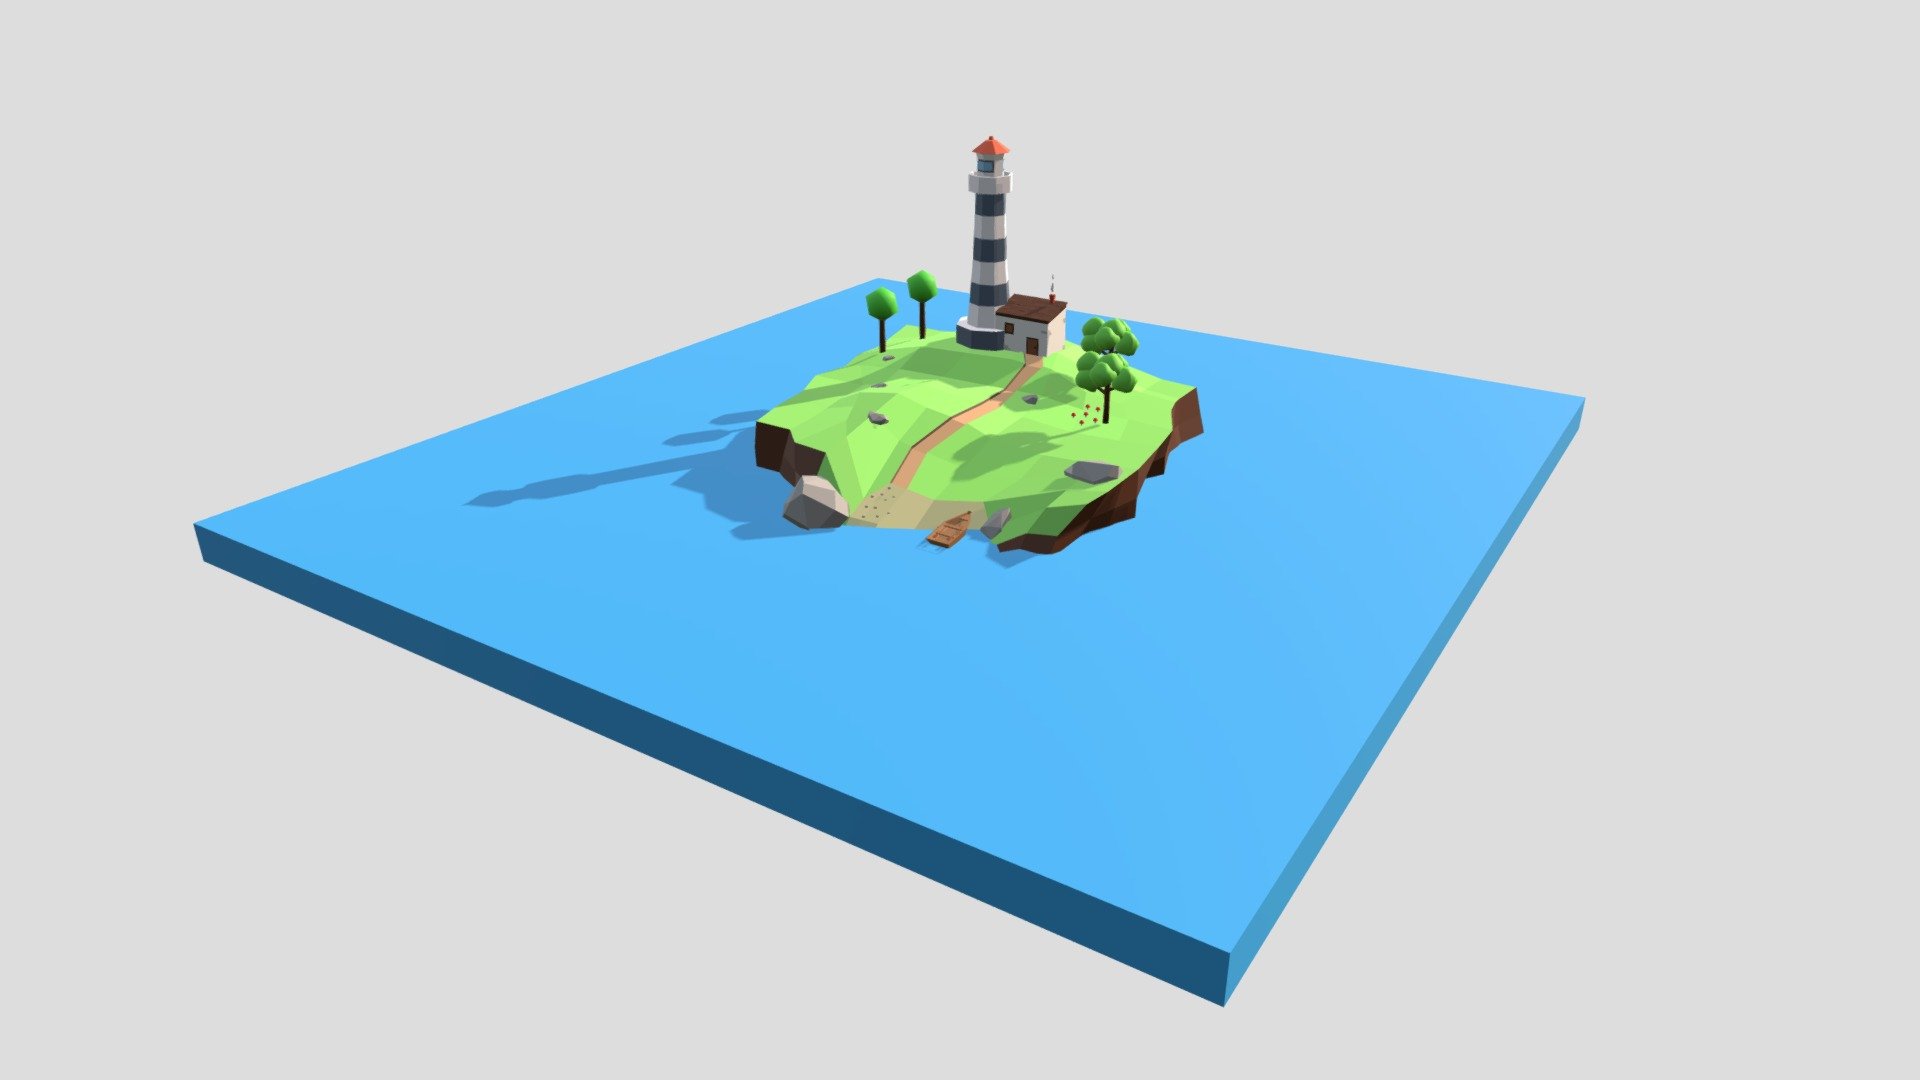 This is a low poly 3d lighthouse island scene. The low poly scene was modeled and prepared for low-poly style renderings, background, general CG visualization. Quads/Tris Topology.

You will get those objects :

Island Landscape
A Lighthouse
A Small House
Rocks
4 Trees
A Small Boat With Paddles
Mushrooms

Verts : 4.296 Faces: 4.118

Simple diffuse colors.

No ring, maps and no UVW mapping is available.

The original file was created in blender. You will receive a 3DS, OBJ, FBX, blend, DAE, STL.

All preview images were rendered with Blender Cycles. Product is ready to render out-of-the-box. Please note that the lights, cameras, and background is only included in the .blend file. The objects are clean and alone in the other provided files, centered at origin 3d model